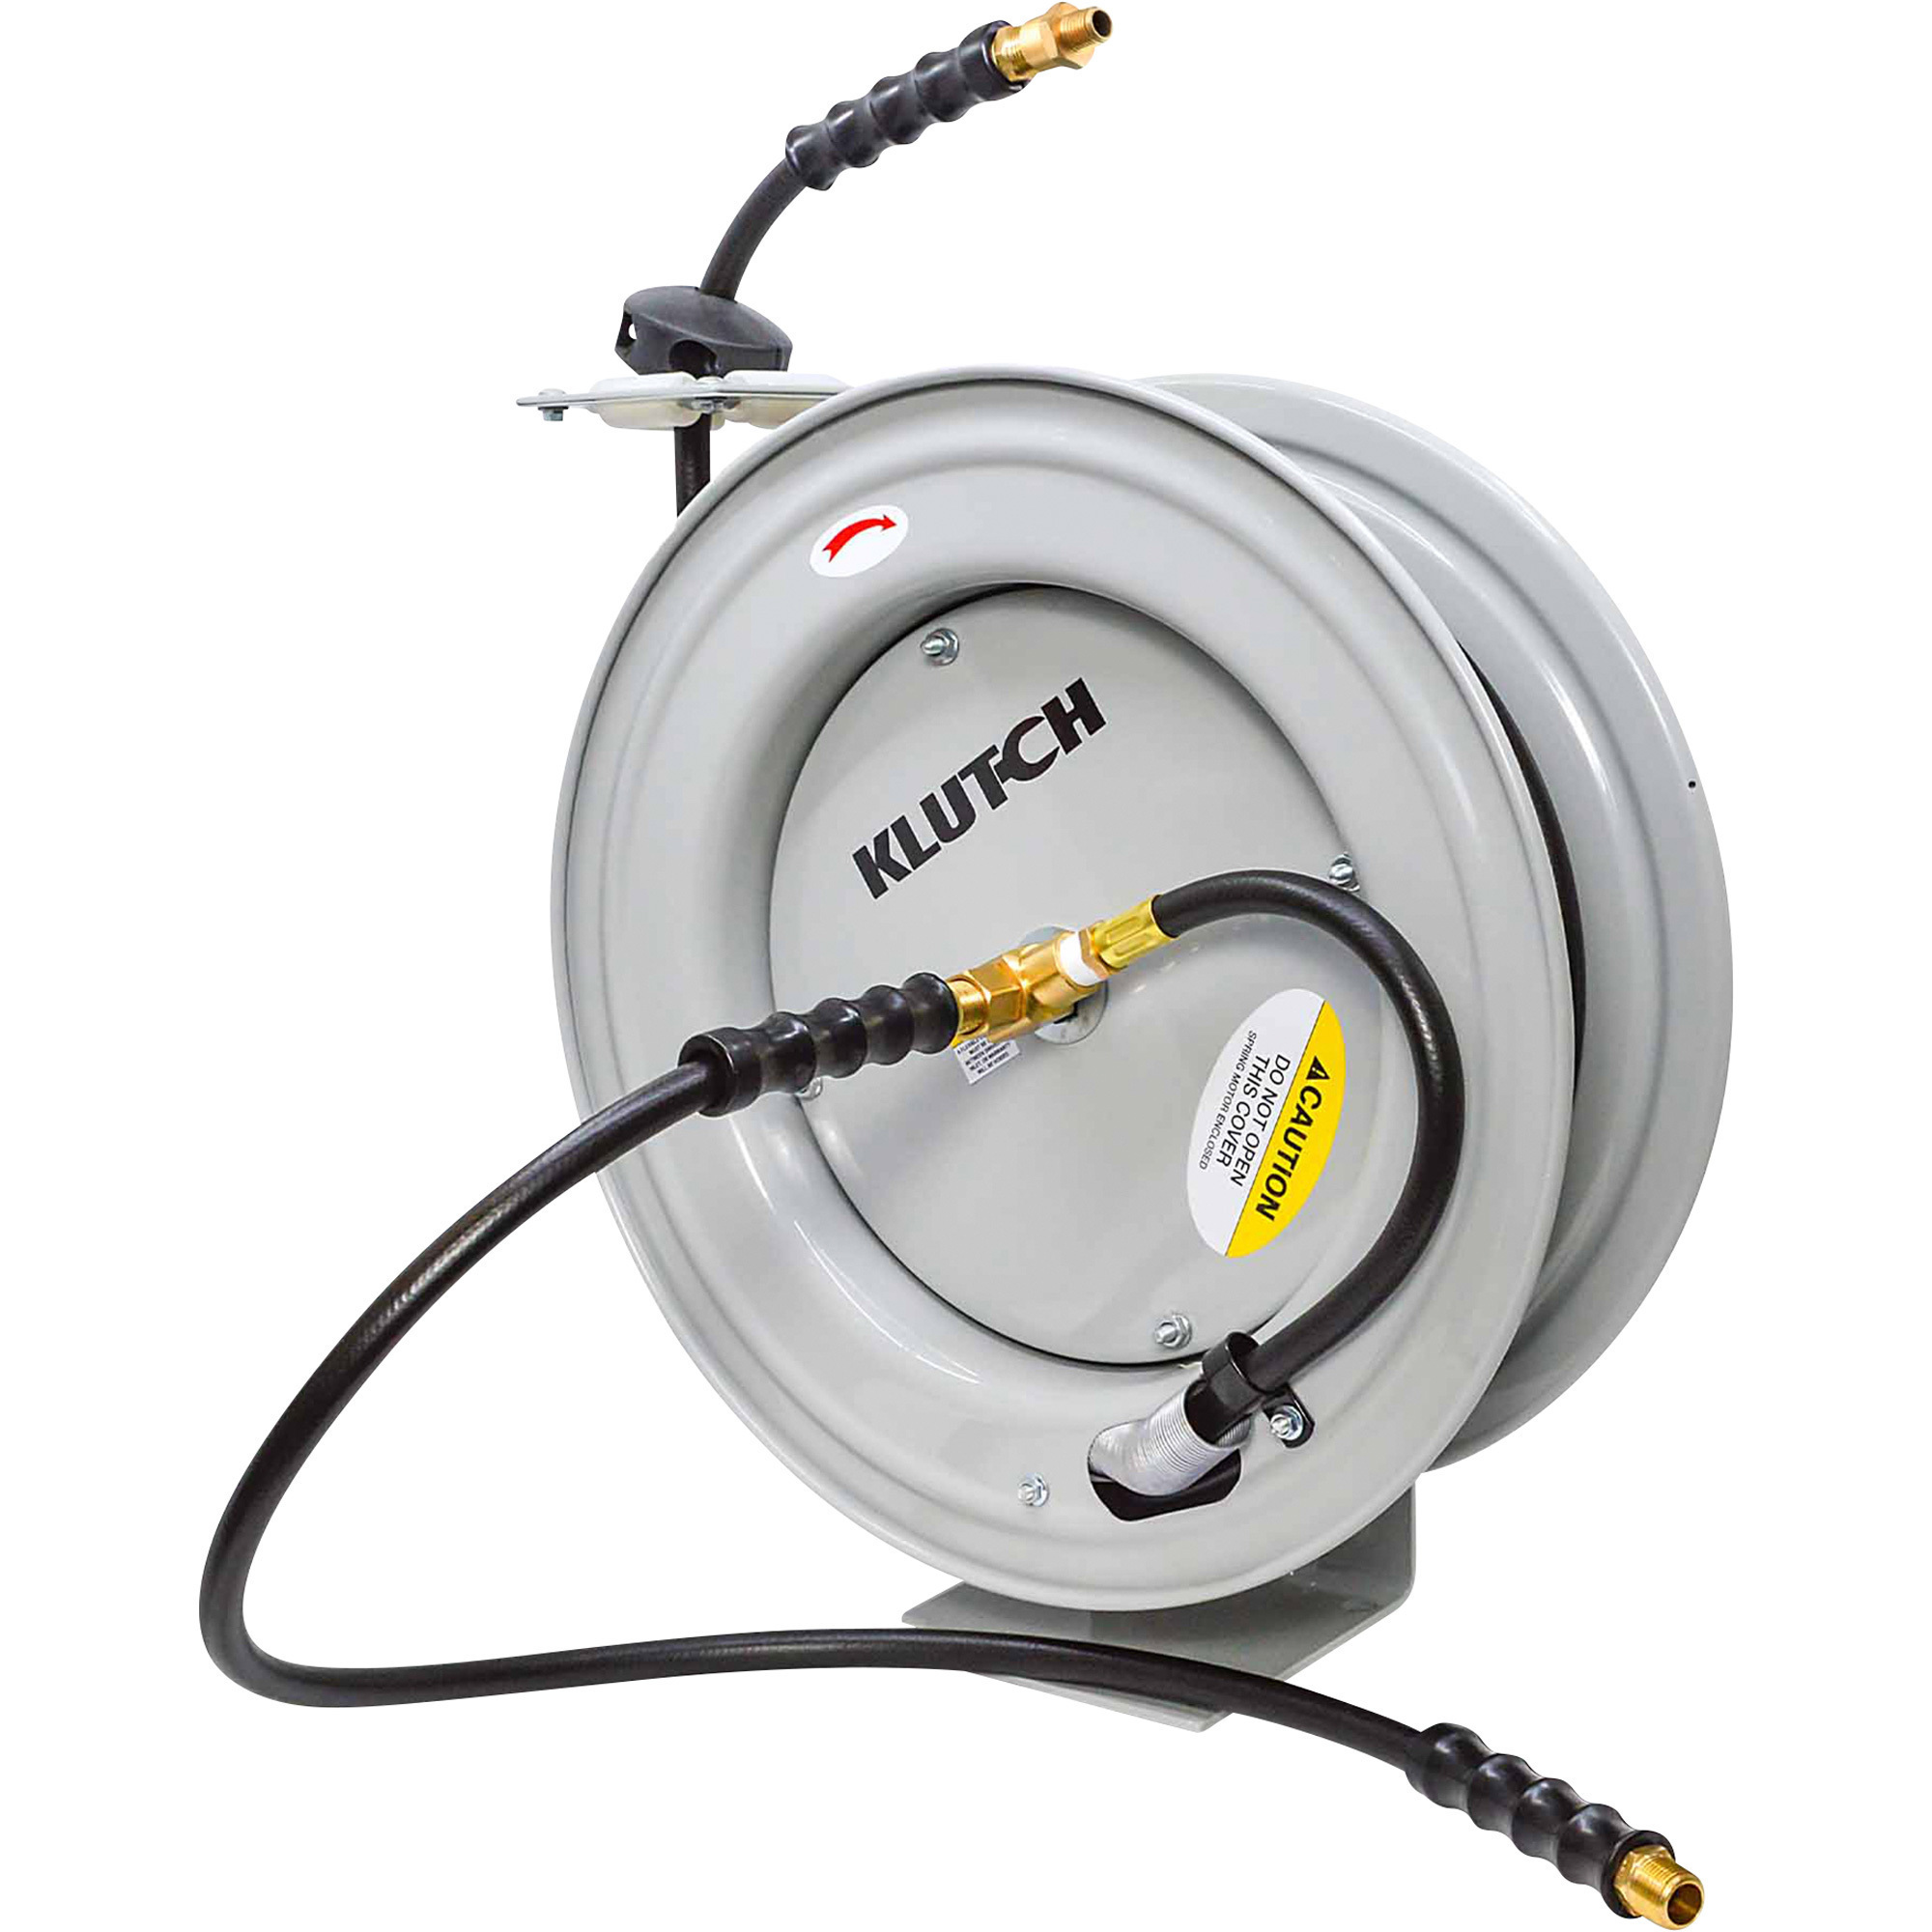 Klutch Auto-Rewind Air Hose Reel, with 3/8in. x 50ft. Rubber Hose